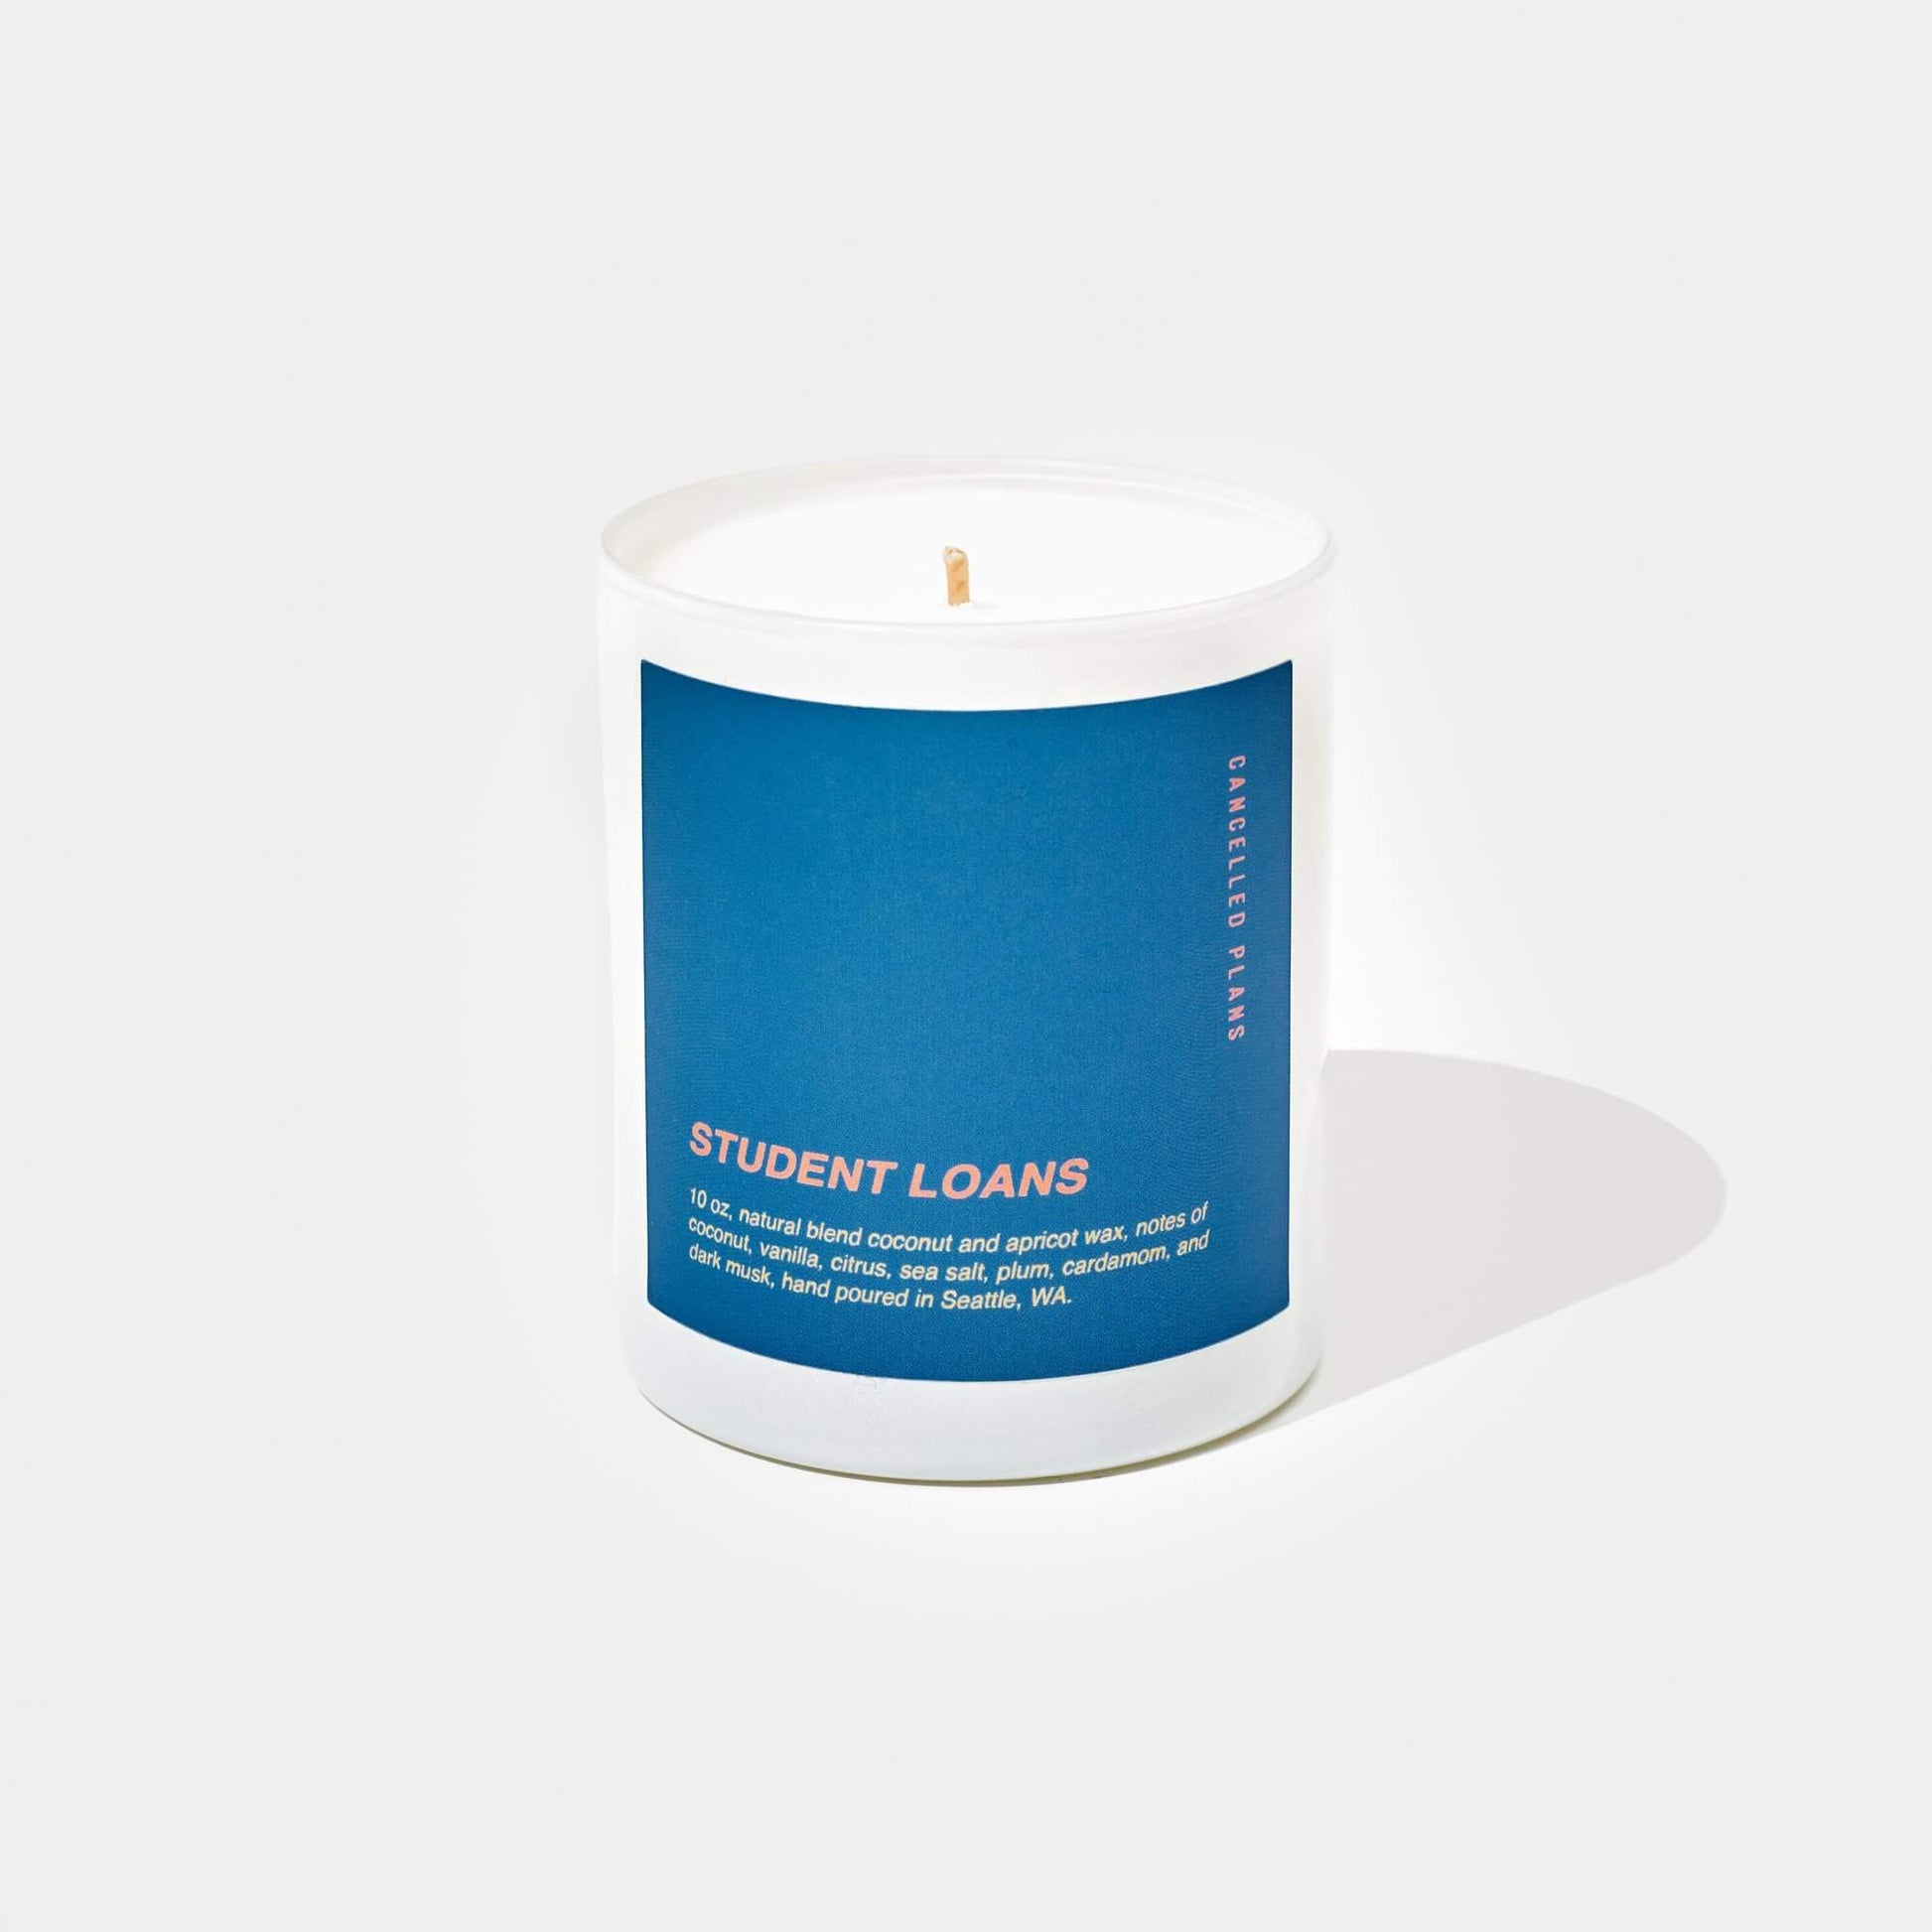 Cancelled Plans Student Loans Scented Candle - Osmology Scented Candles & Home Fragrance